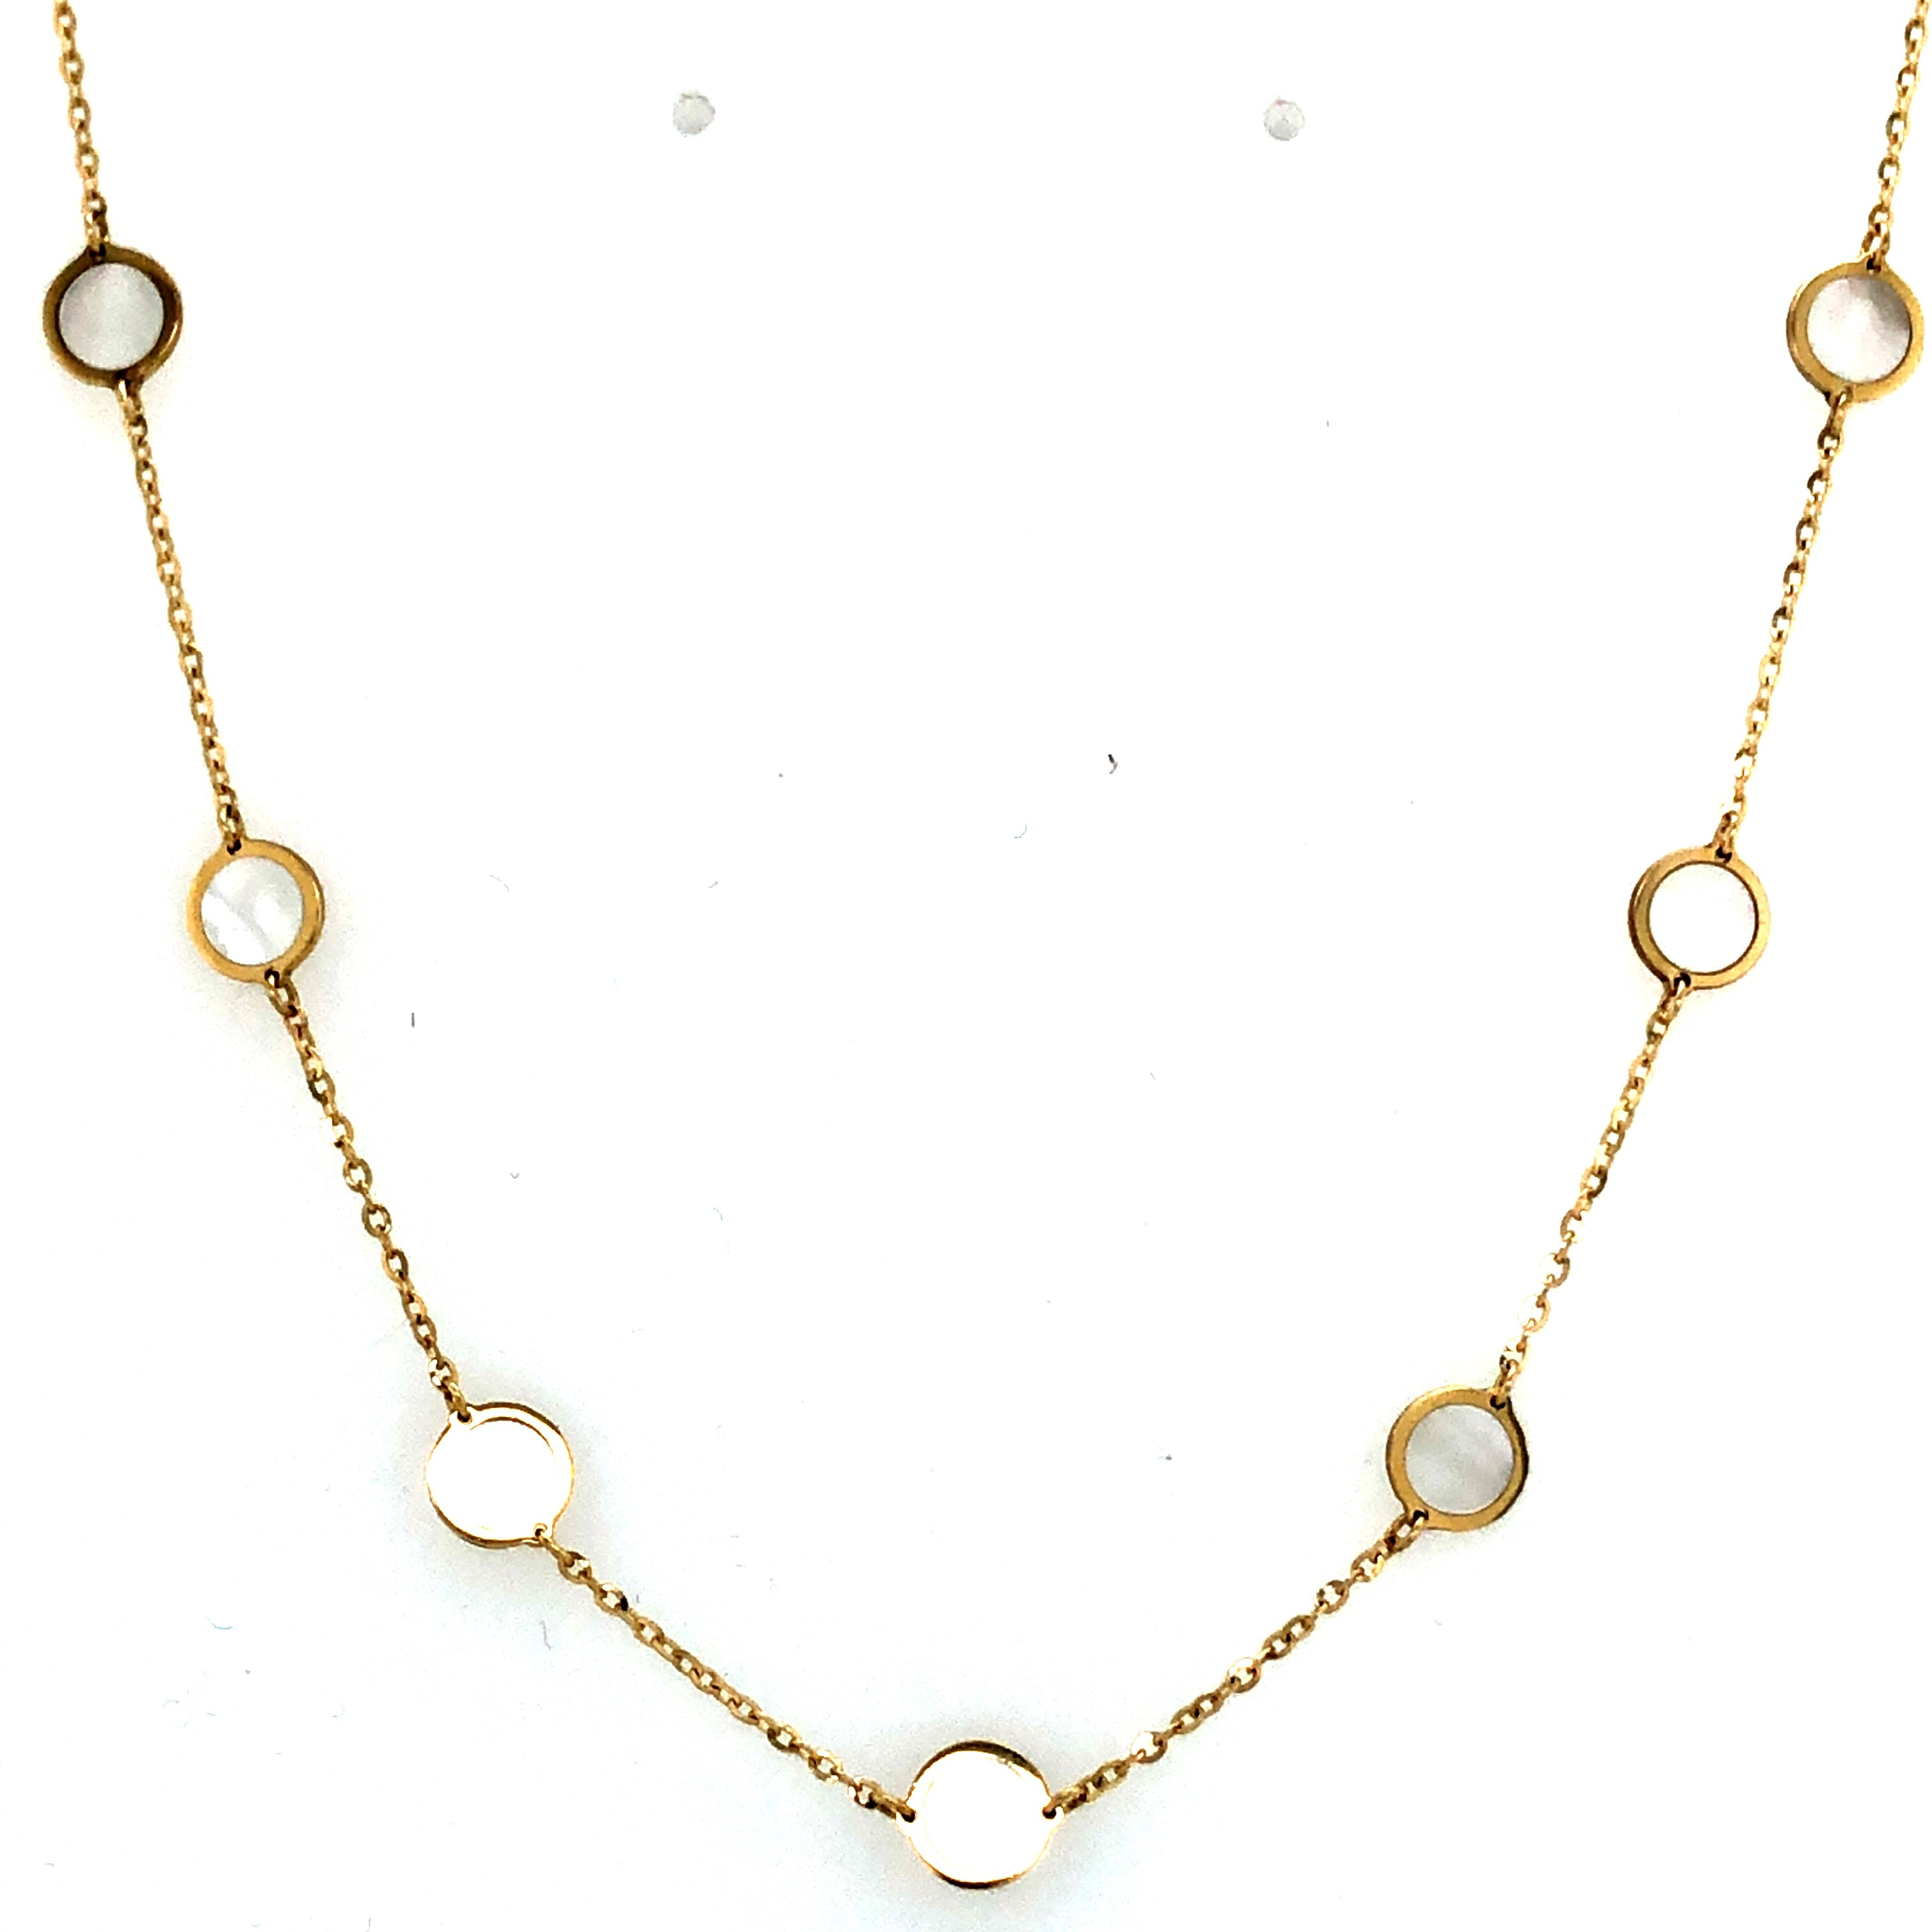 Link Pearl Necklace - Pearl Necklace